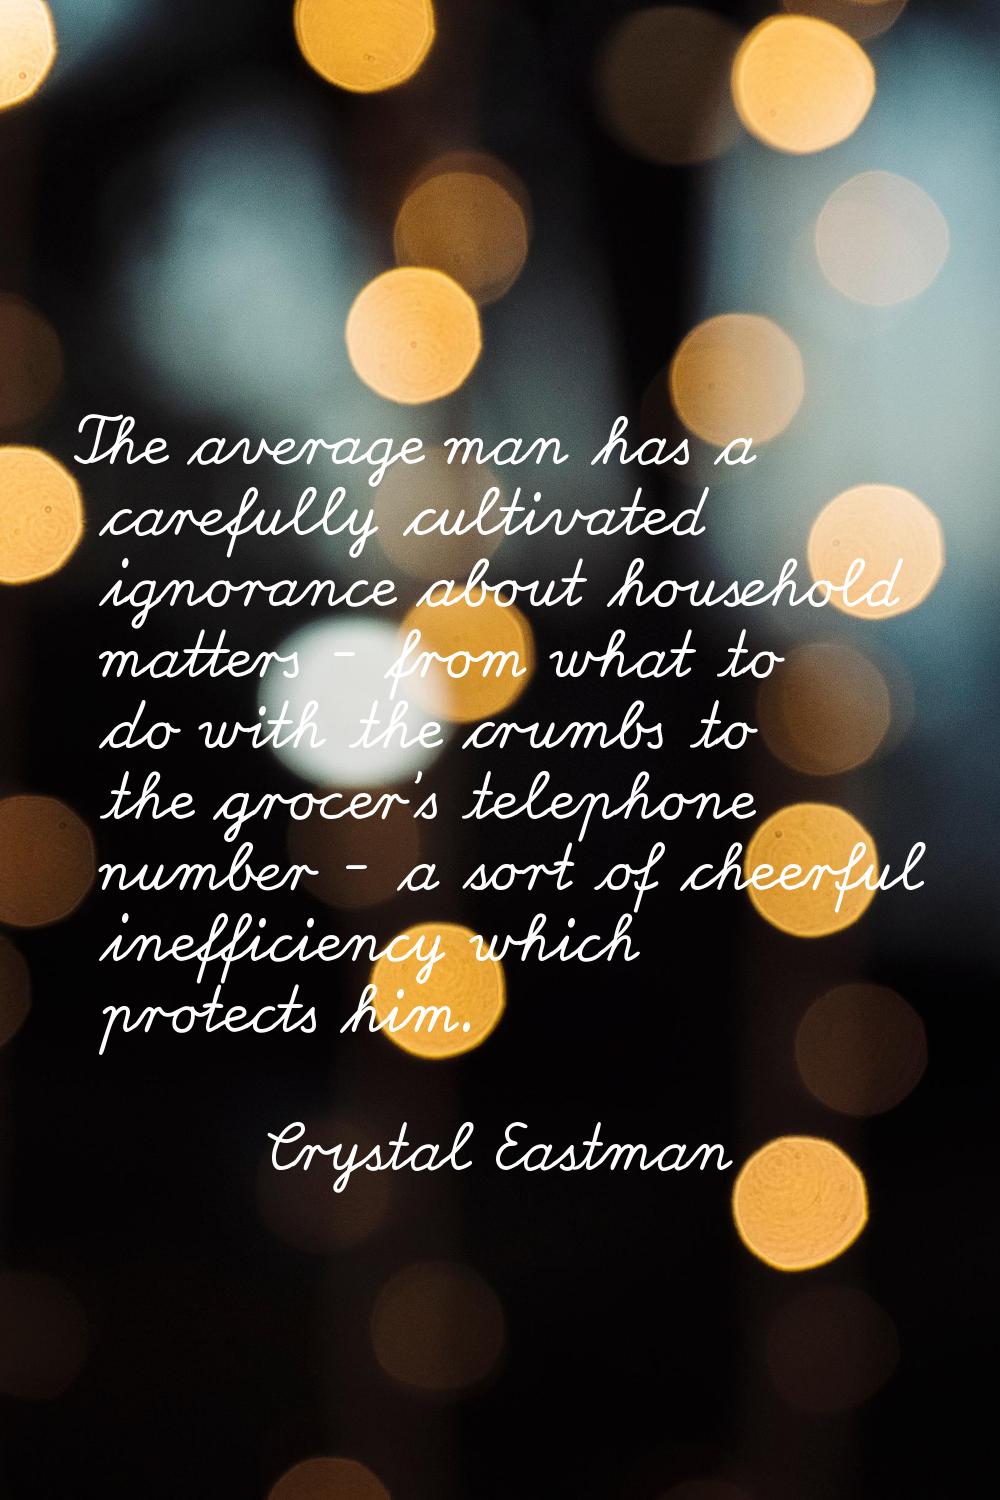 The average man has a carefully cultivated ignorance about household matters - from what to do with